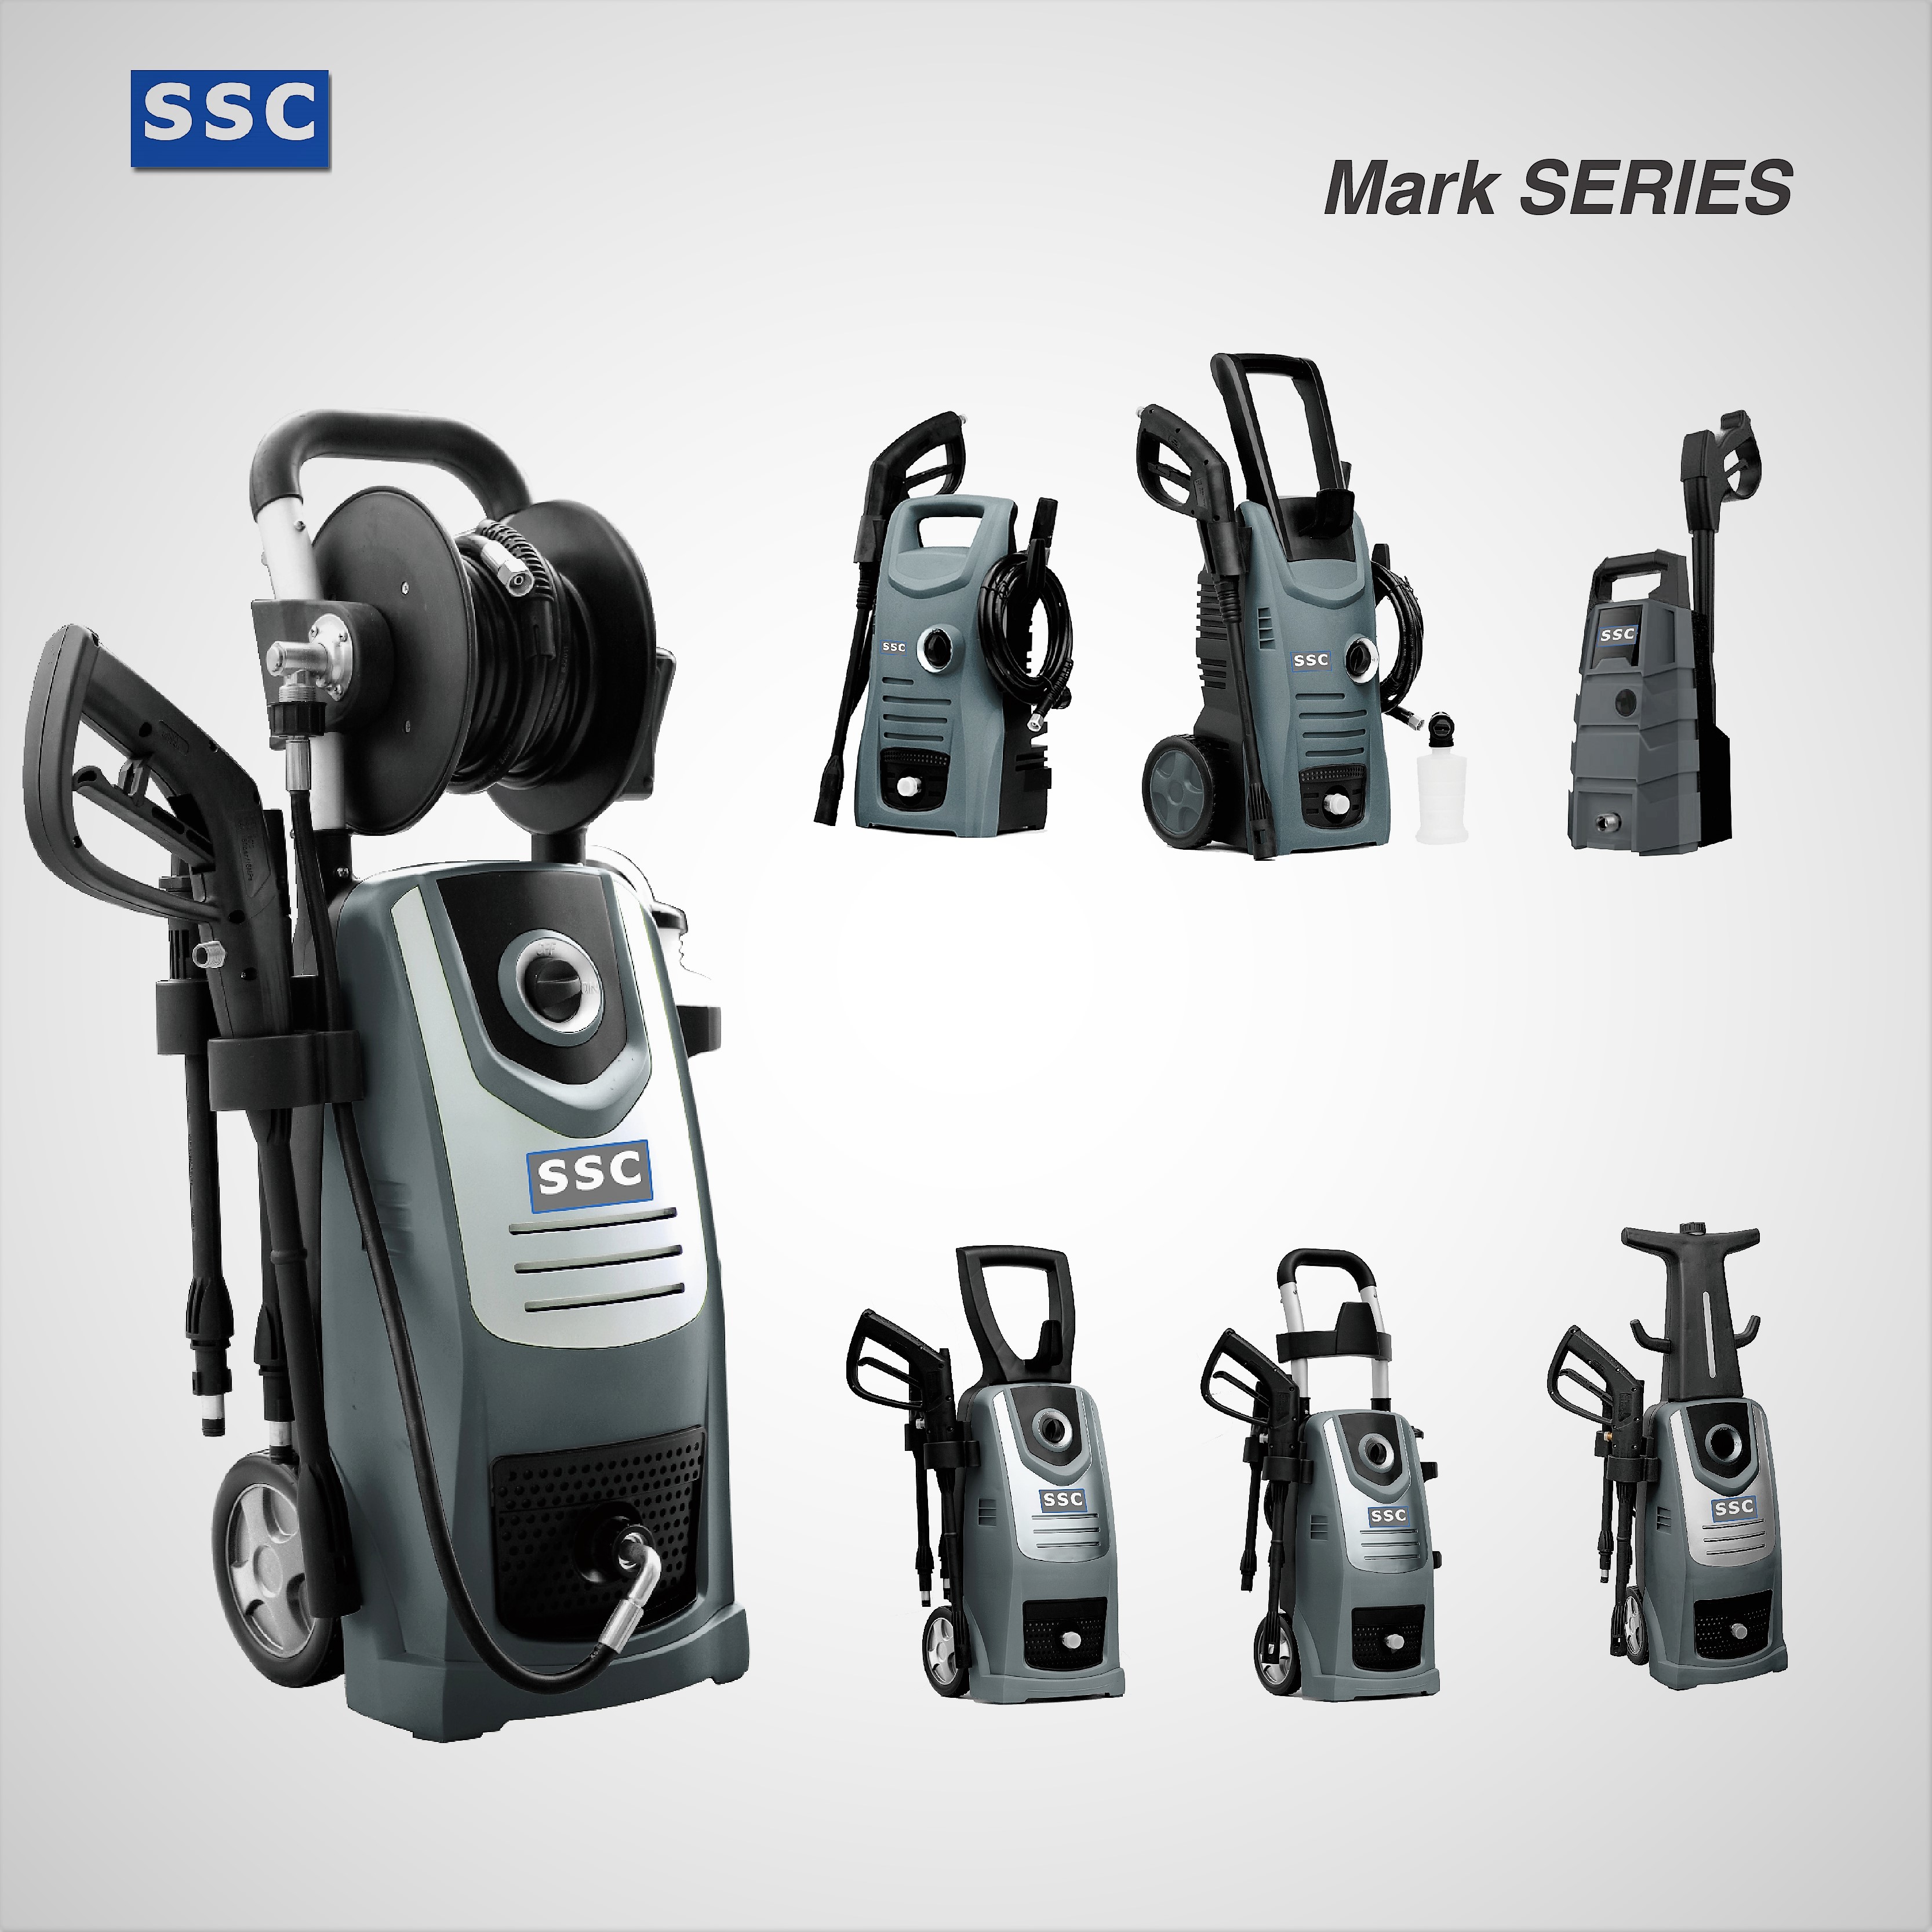 Mark SERIES  residential electrical pressure washer  cleaner